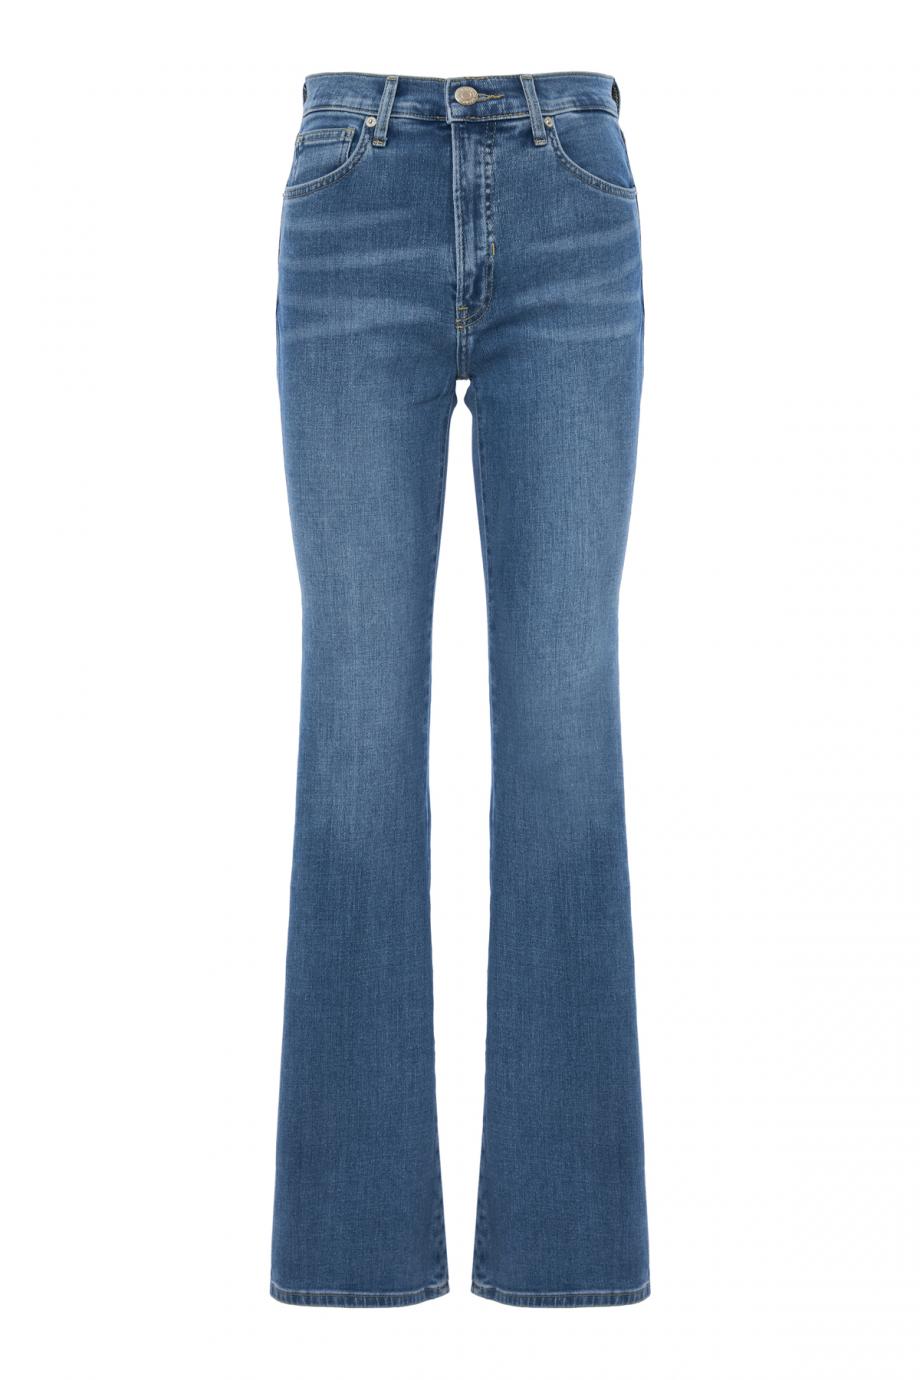 Beverley high rise cotton-blend skinny flare jeans 